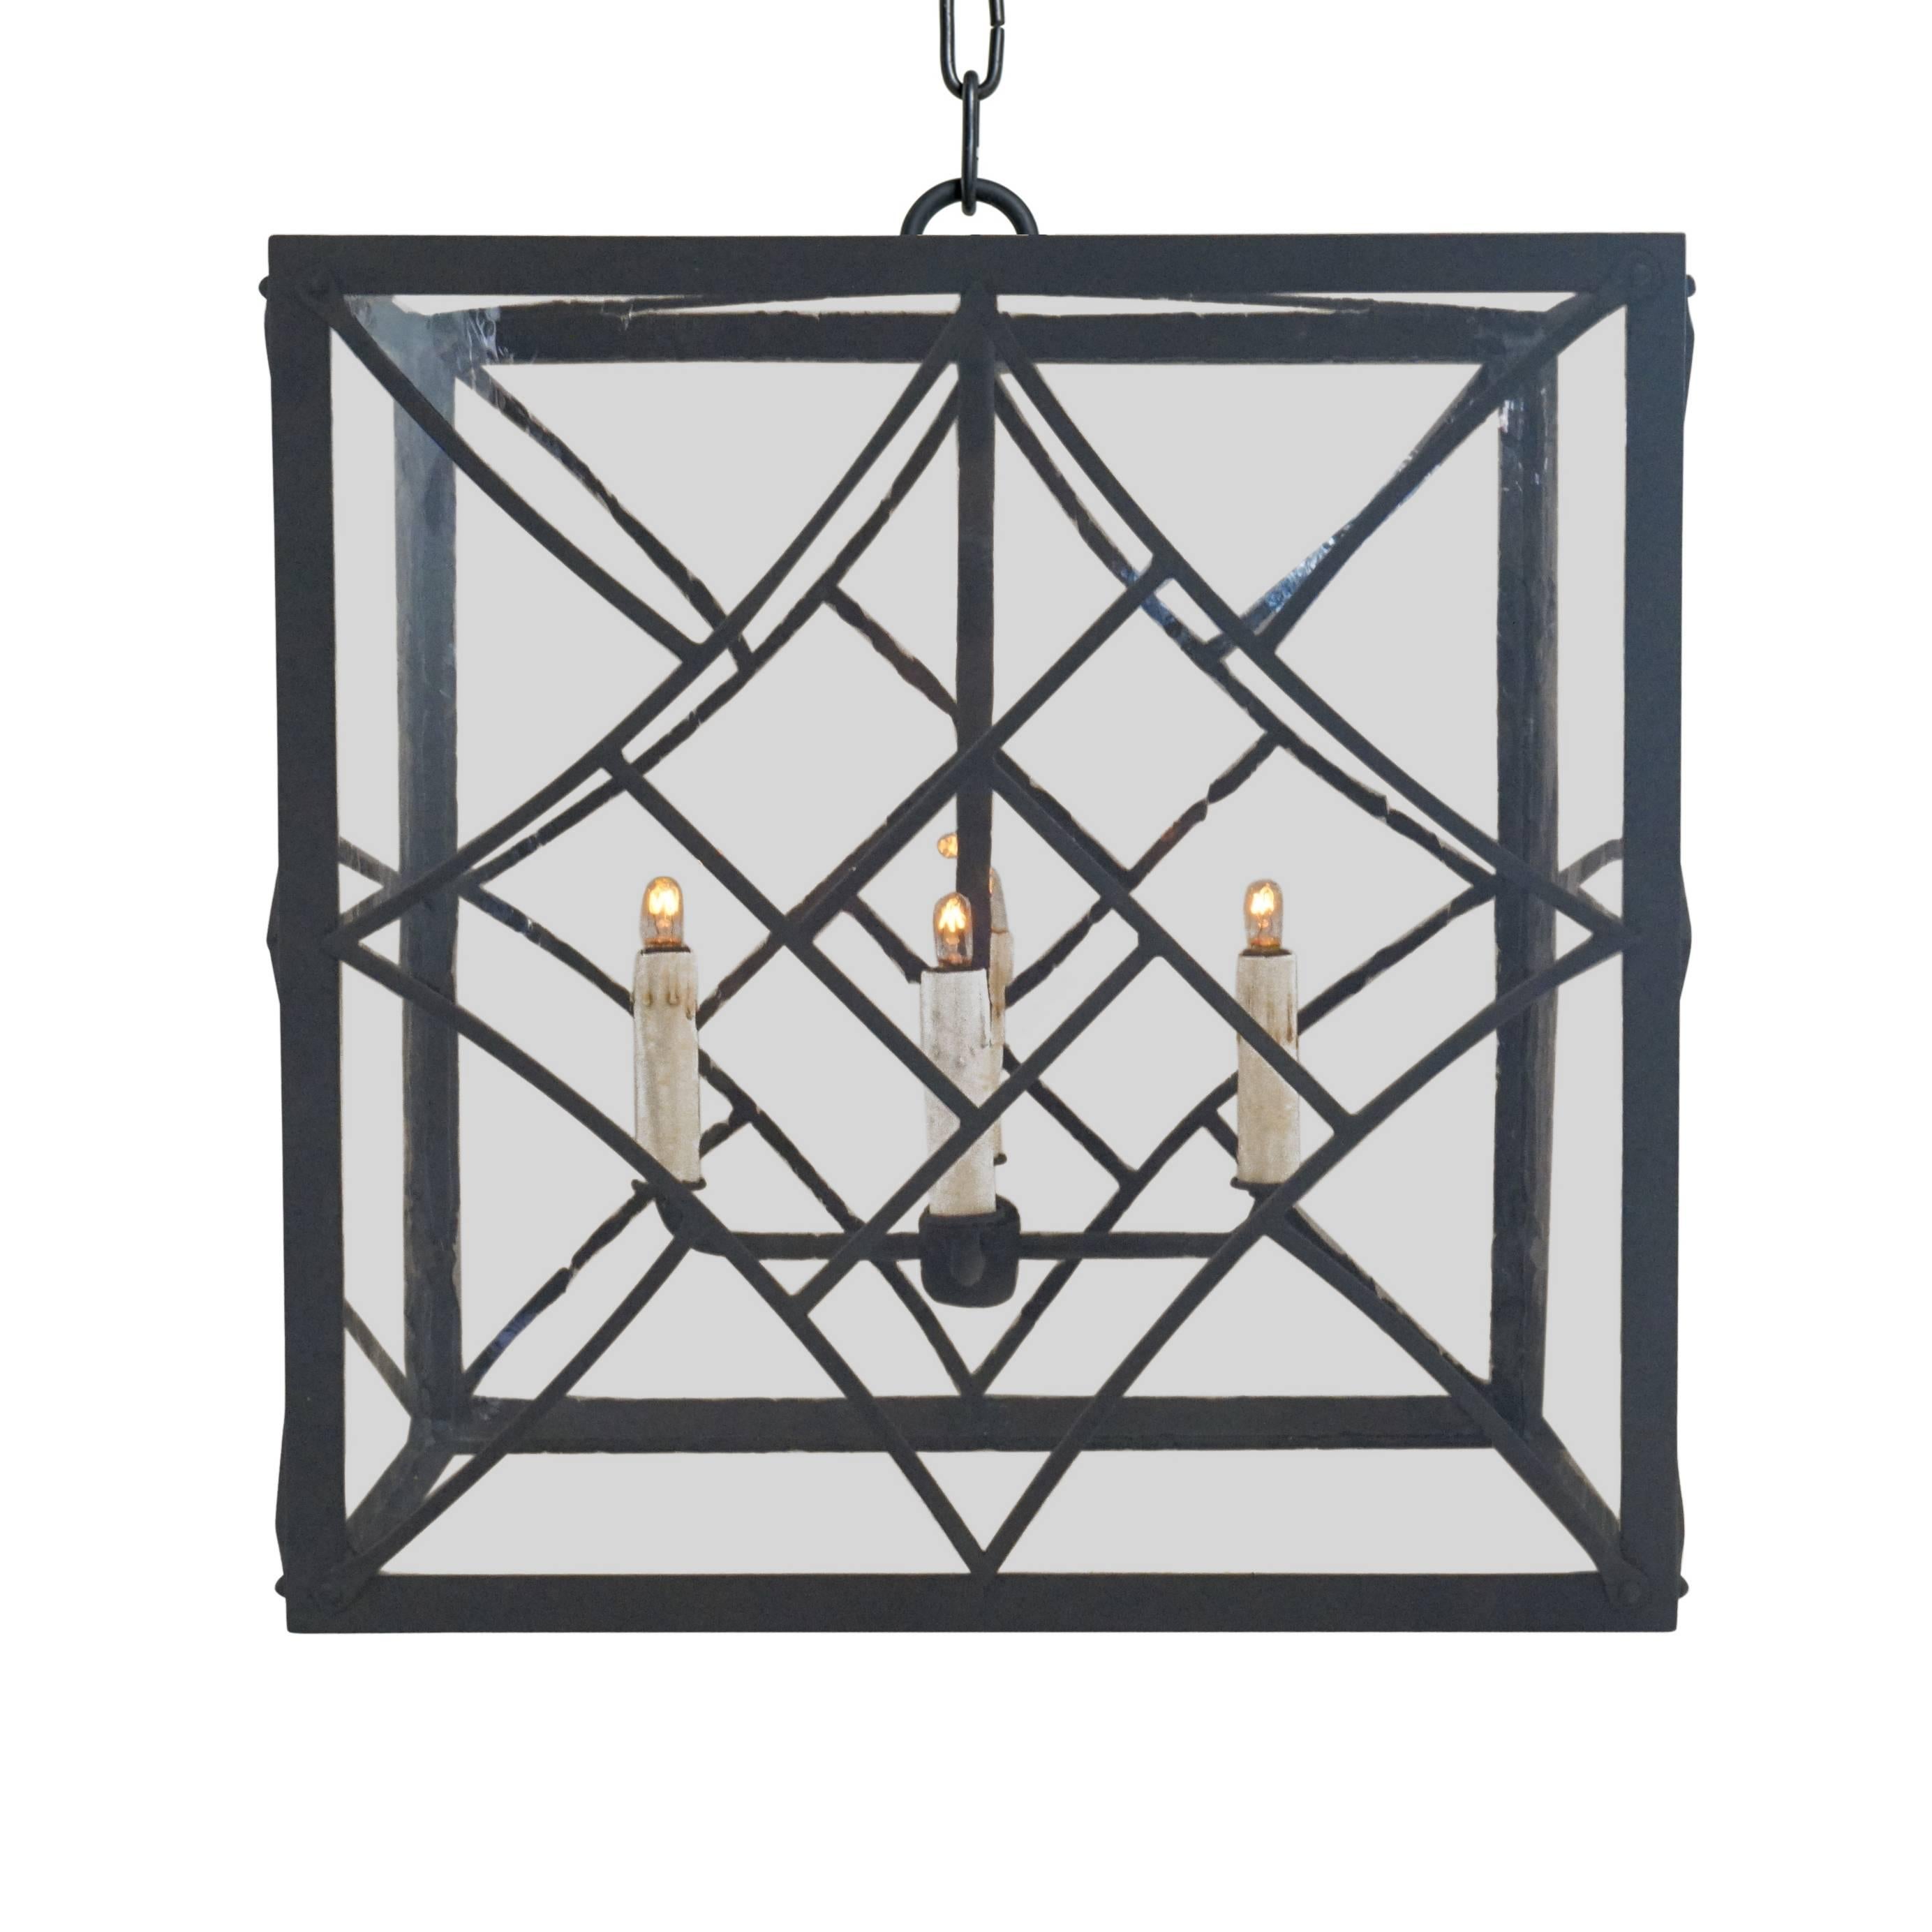 Evoking the Art Deco style of the 1920s and 1930s, our Nouveau pendant features bold geometric shapes and a chevron motif. Handcrafted in wrought iron with a Classic grey finish. Antique glass pairs well with the Mid-Century Modern design, providing